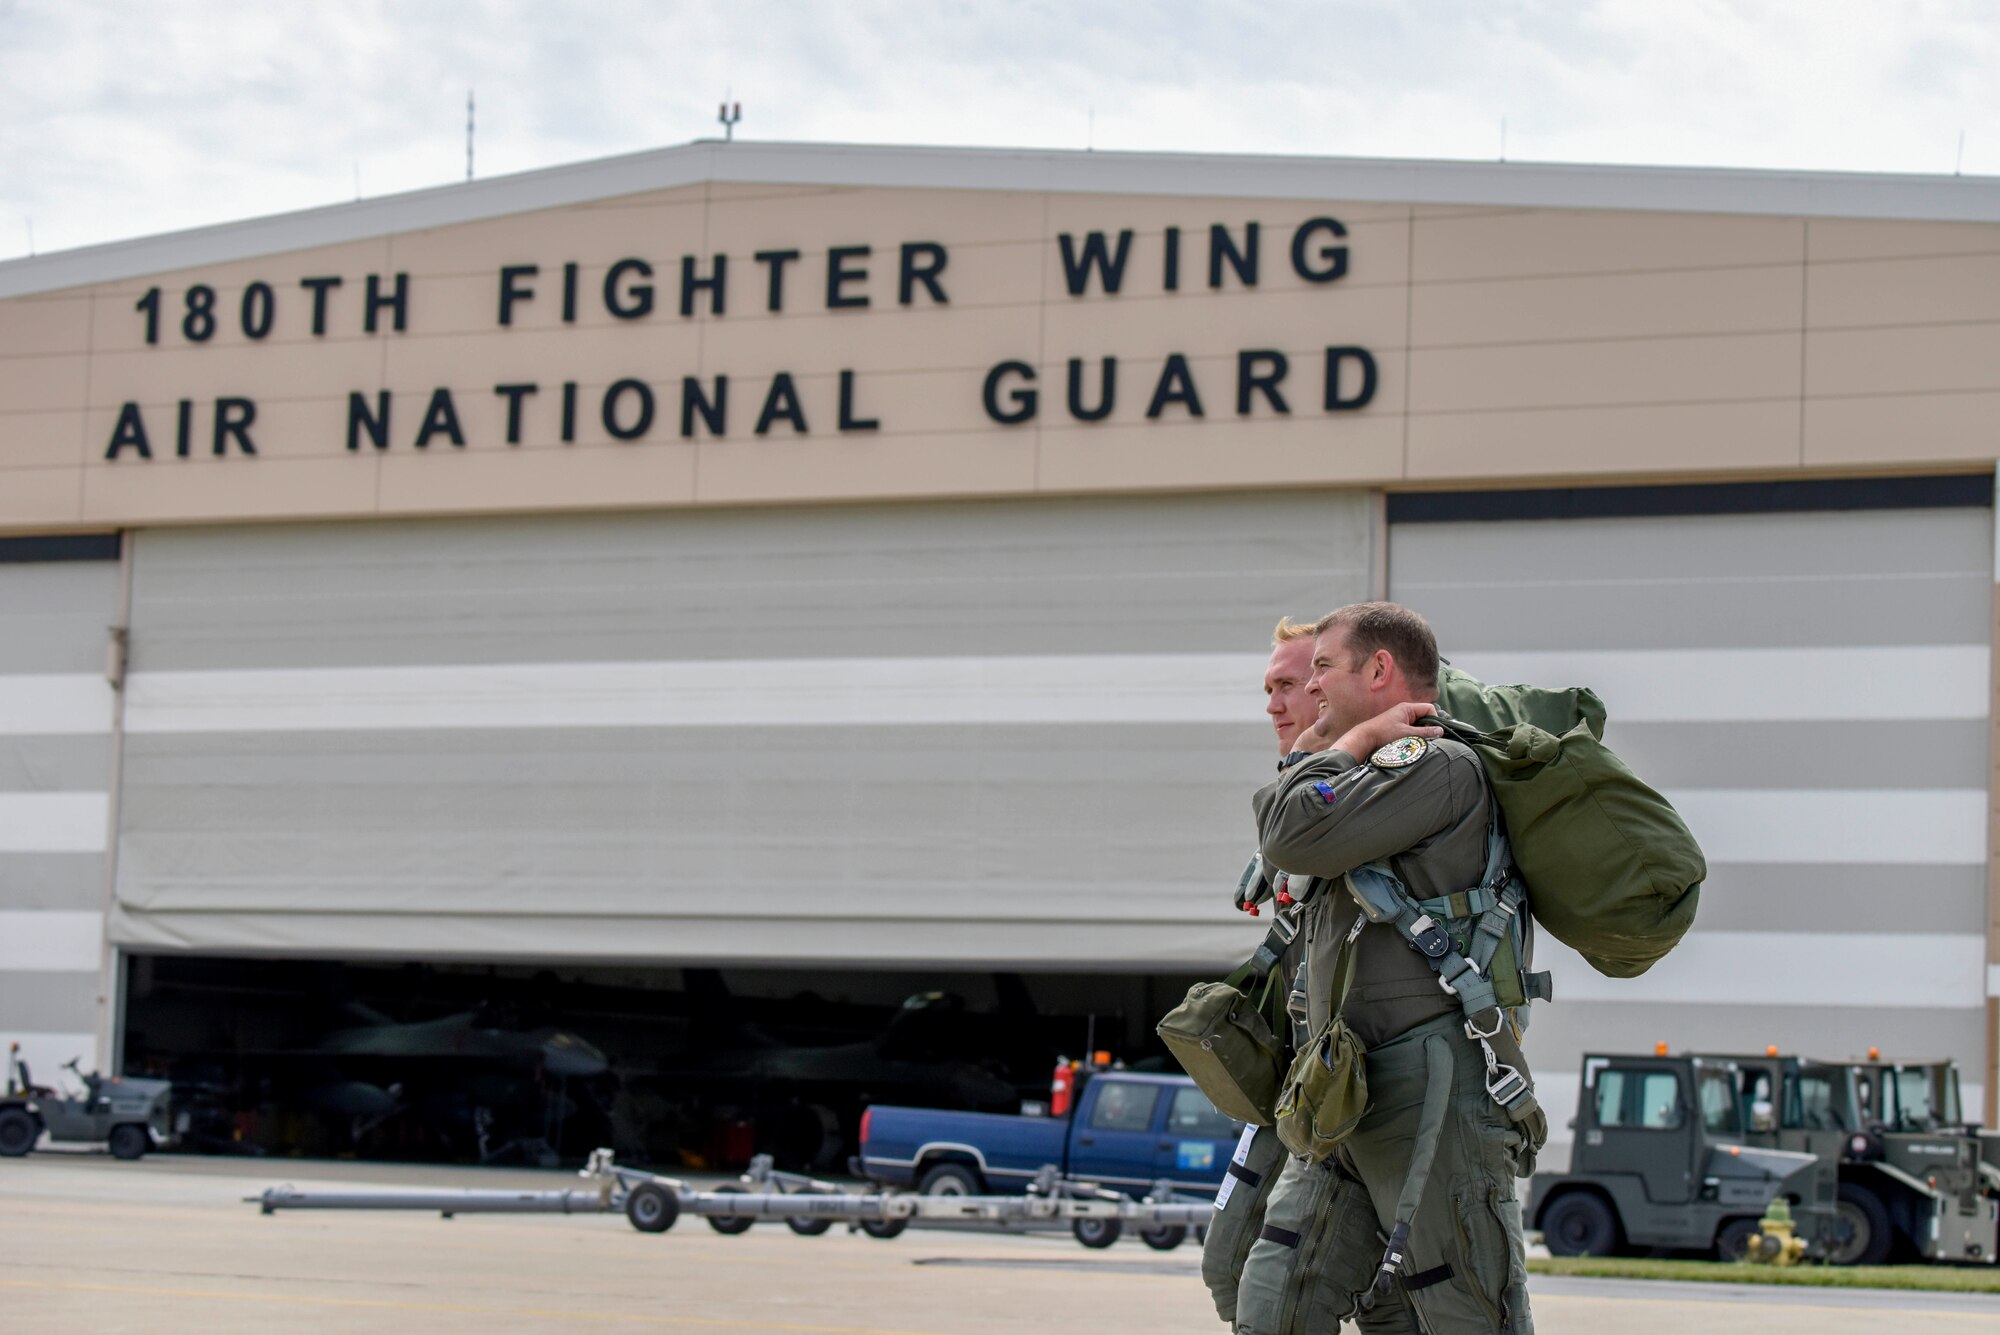 U.S. Air Force F-16 Fighter Pilots, assigned to the Ohio National Guard’s 180th Fighter Wing, walk across the flightline before a training flight at the 180FW in Swanton, Ohio, July 30, 2020.